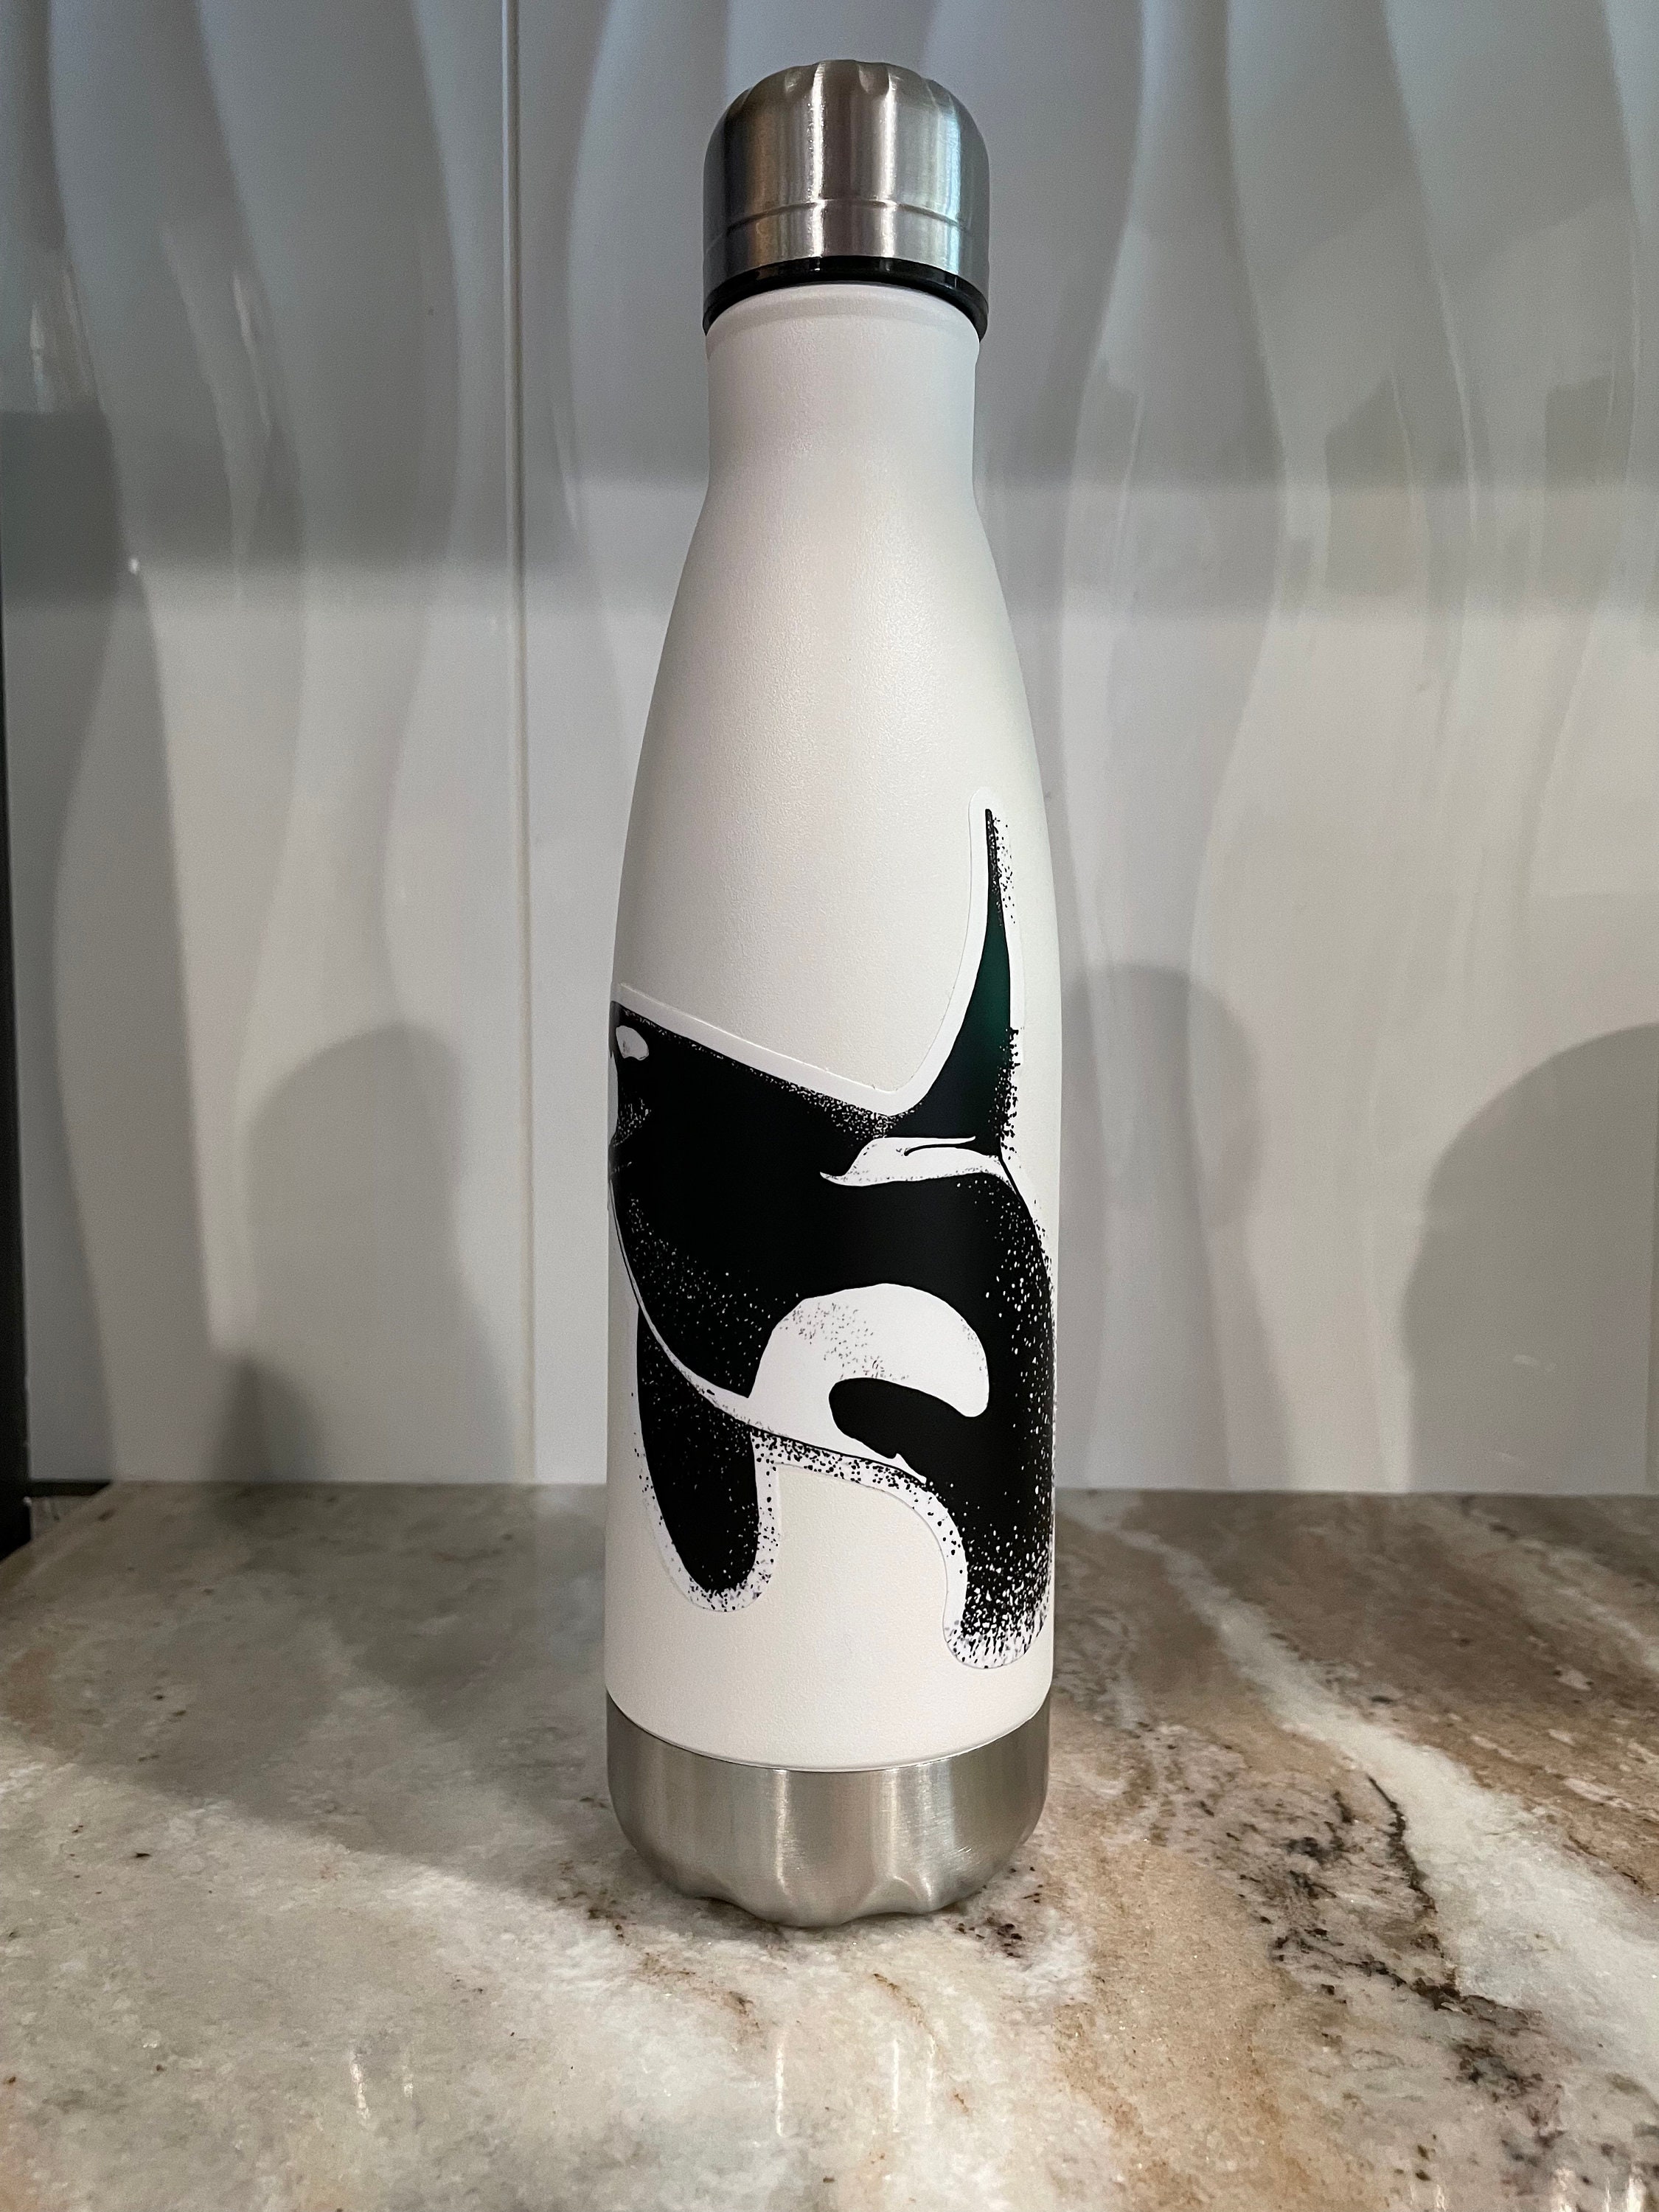 Breaching Orca Stainless Steel Water Bottle 